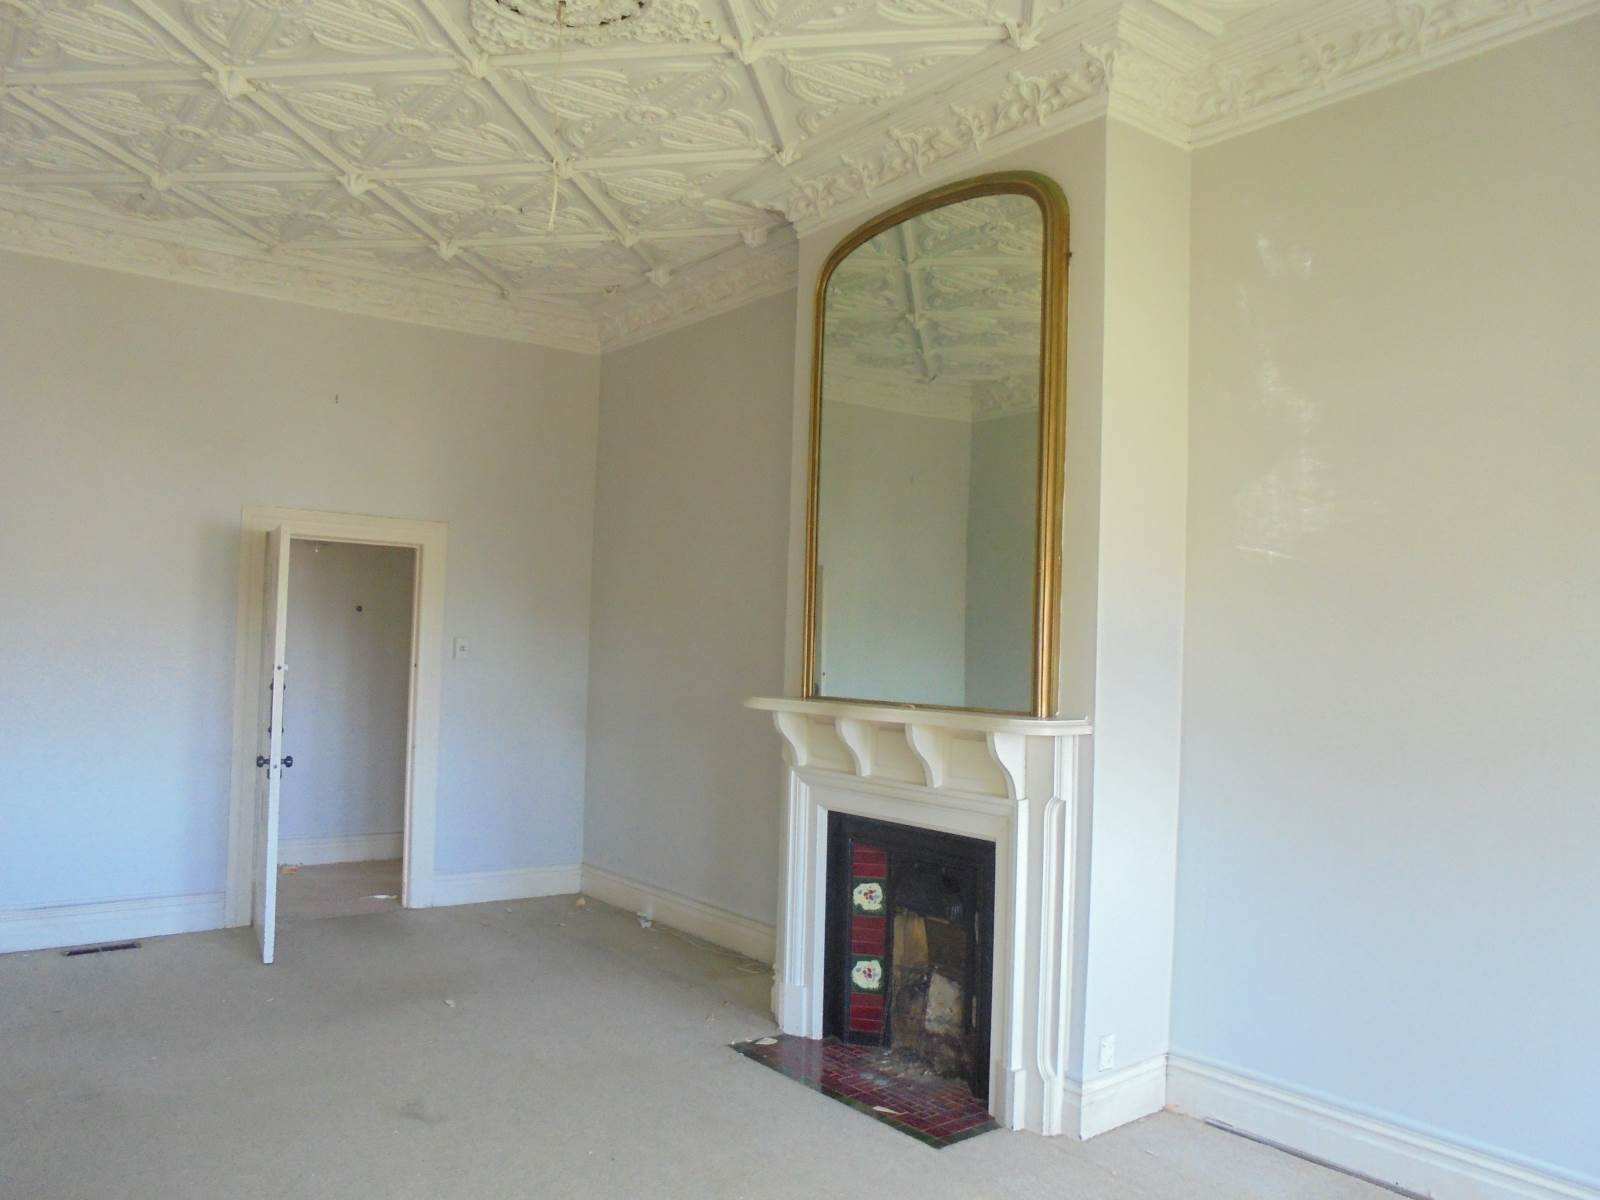 Plaster Fireplace Beautiful 16 Mays Road Ehunga Auckland City House for Rent Under